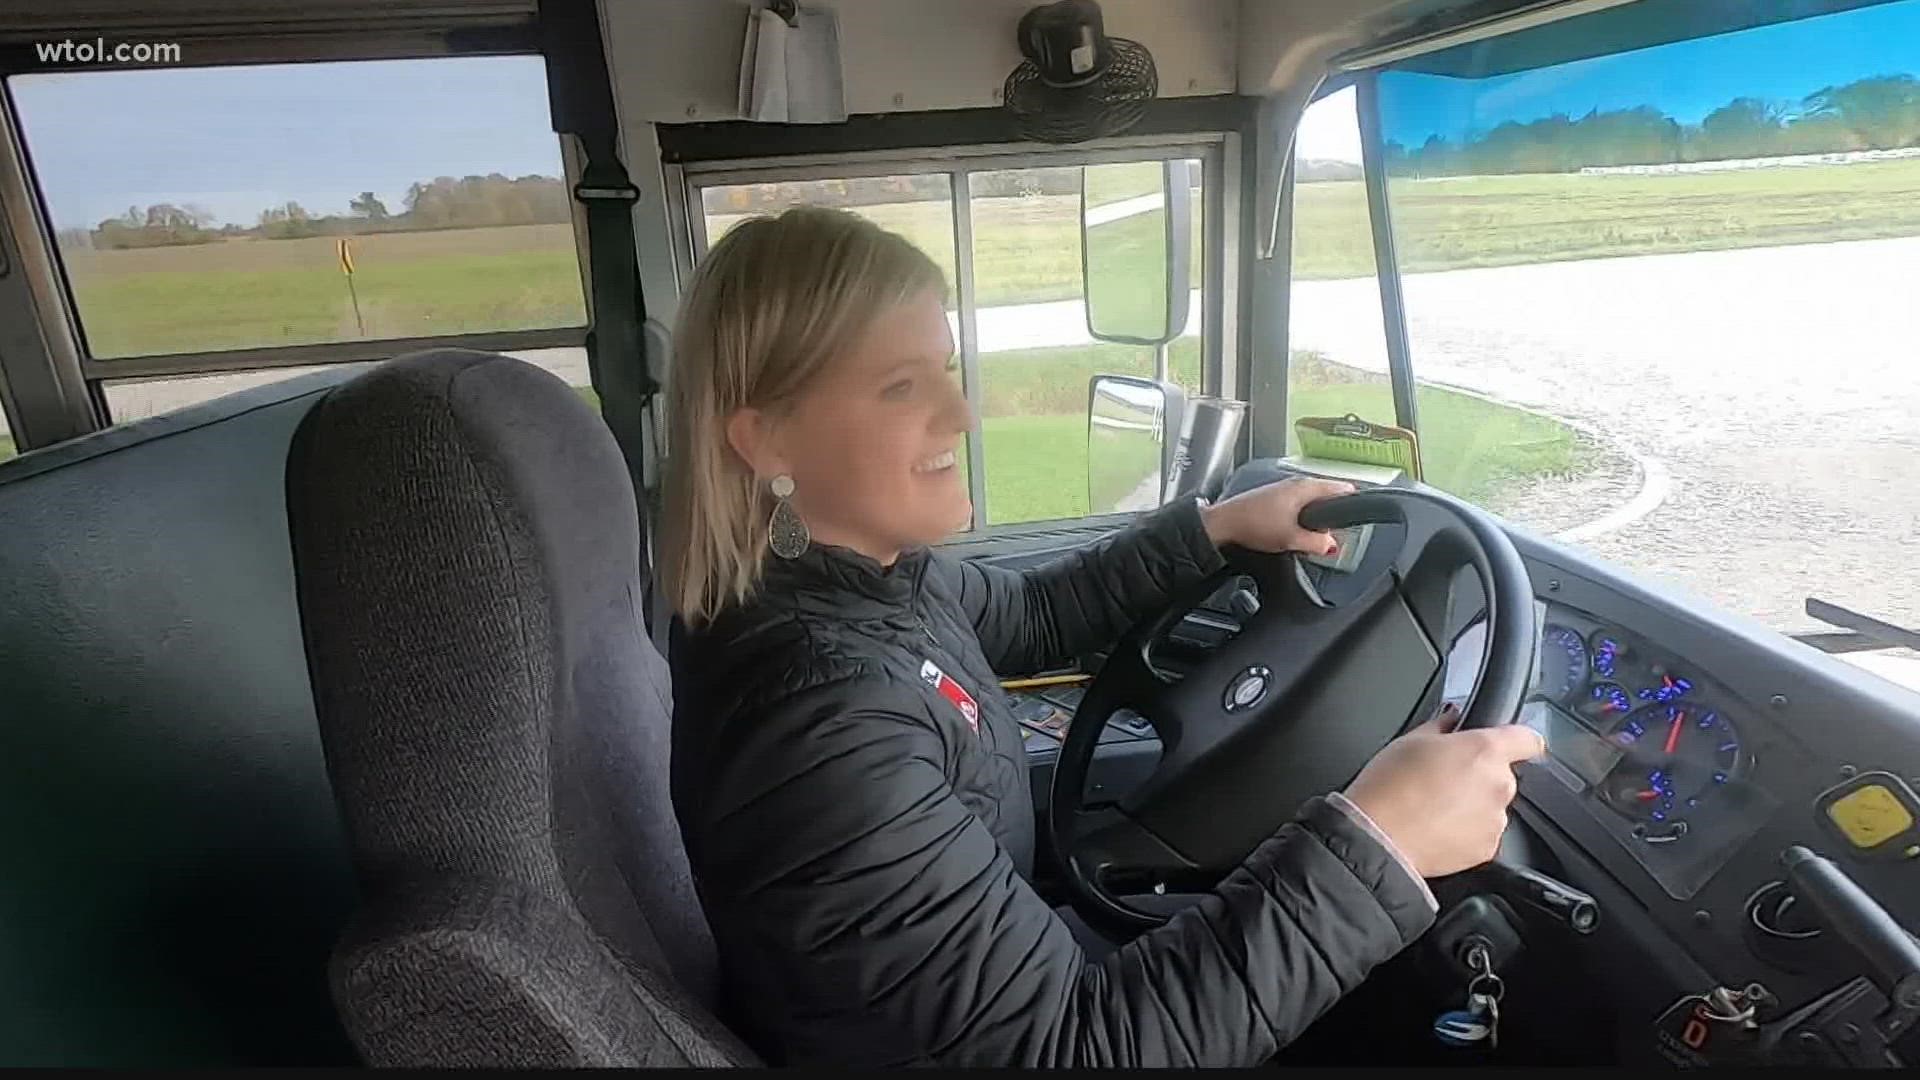 See how local school districts are working to help solve the shortage with creative solutions. And see how WTOL 11's Amy Steigerwald does behind the wheel.